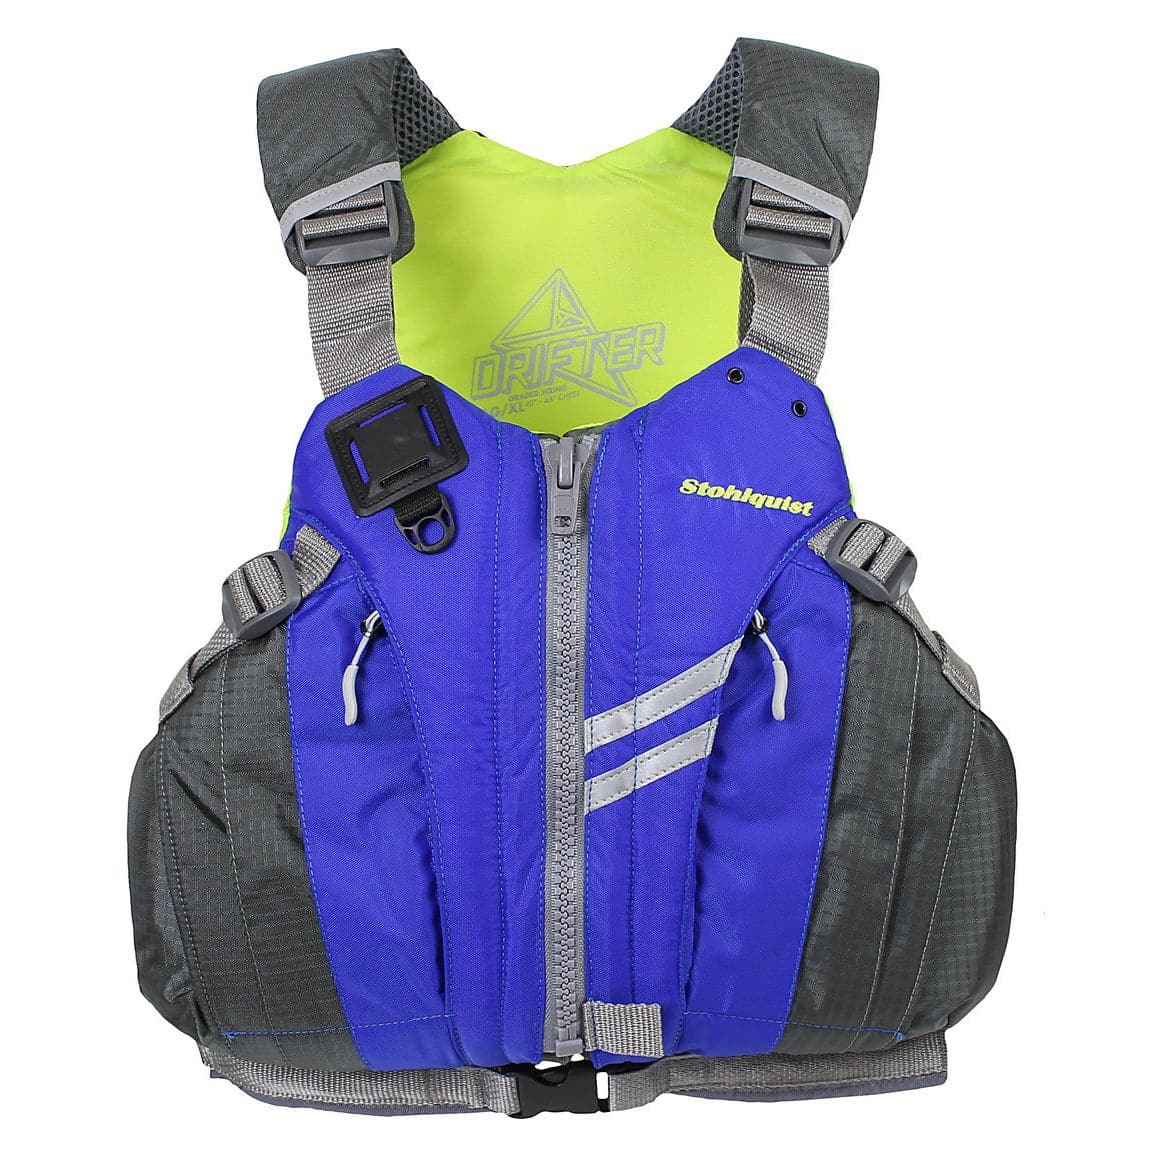 Featuring the Drifter PFD gift for kayaker, men's pfd manufactured by Stohlquist shown here from a second angle.